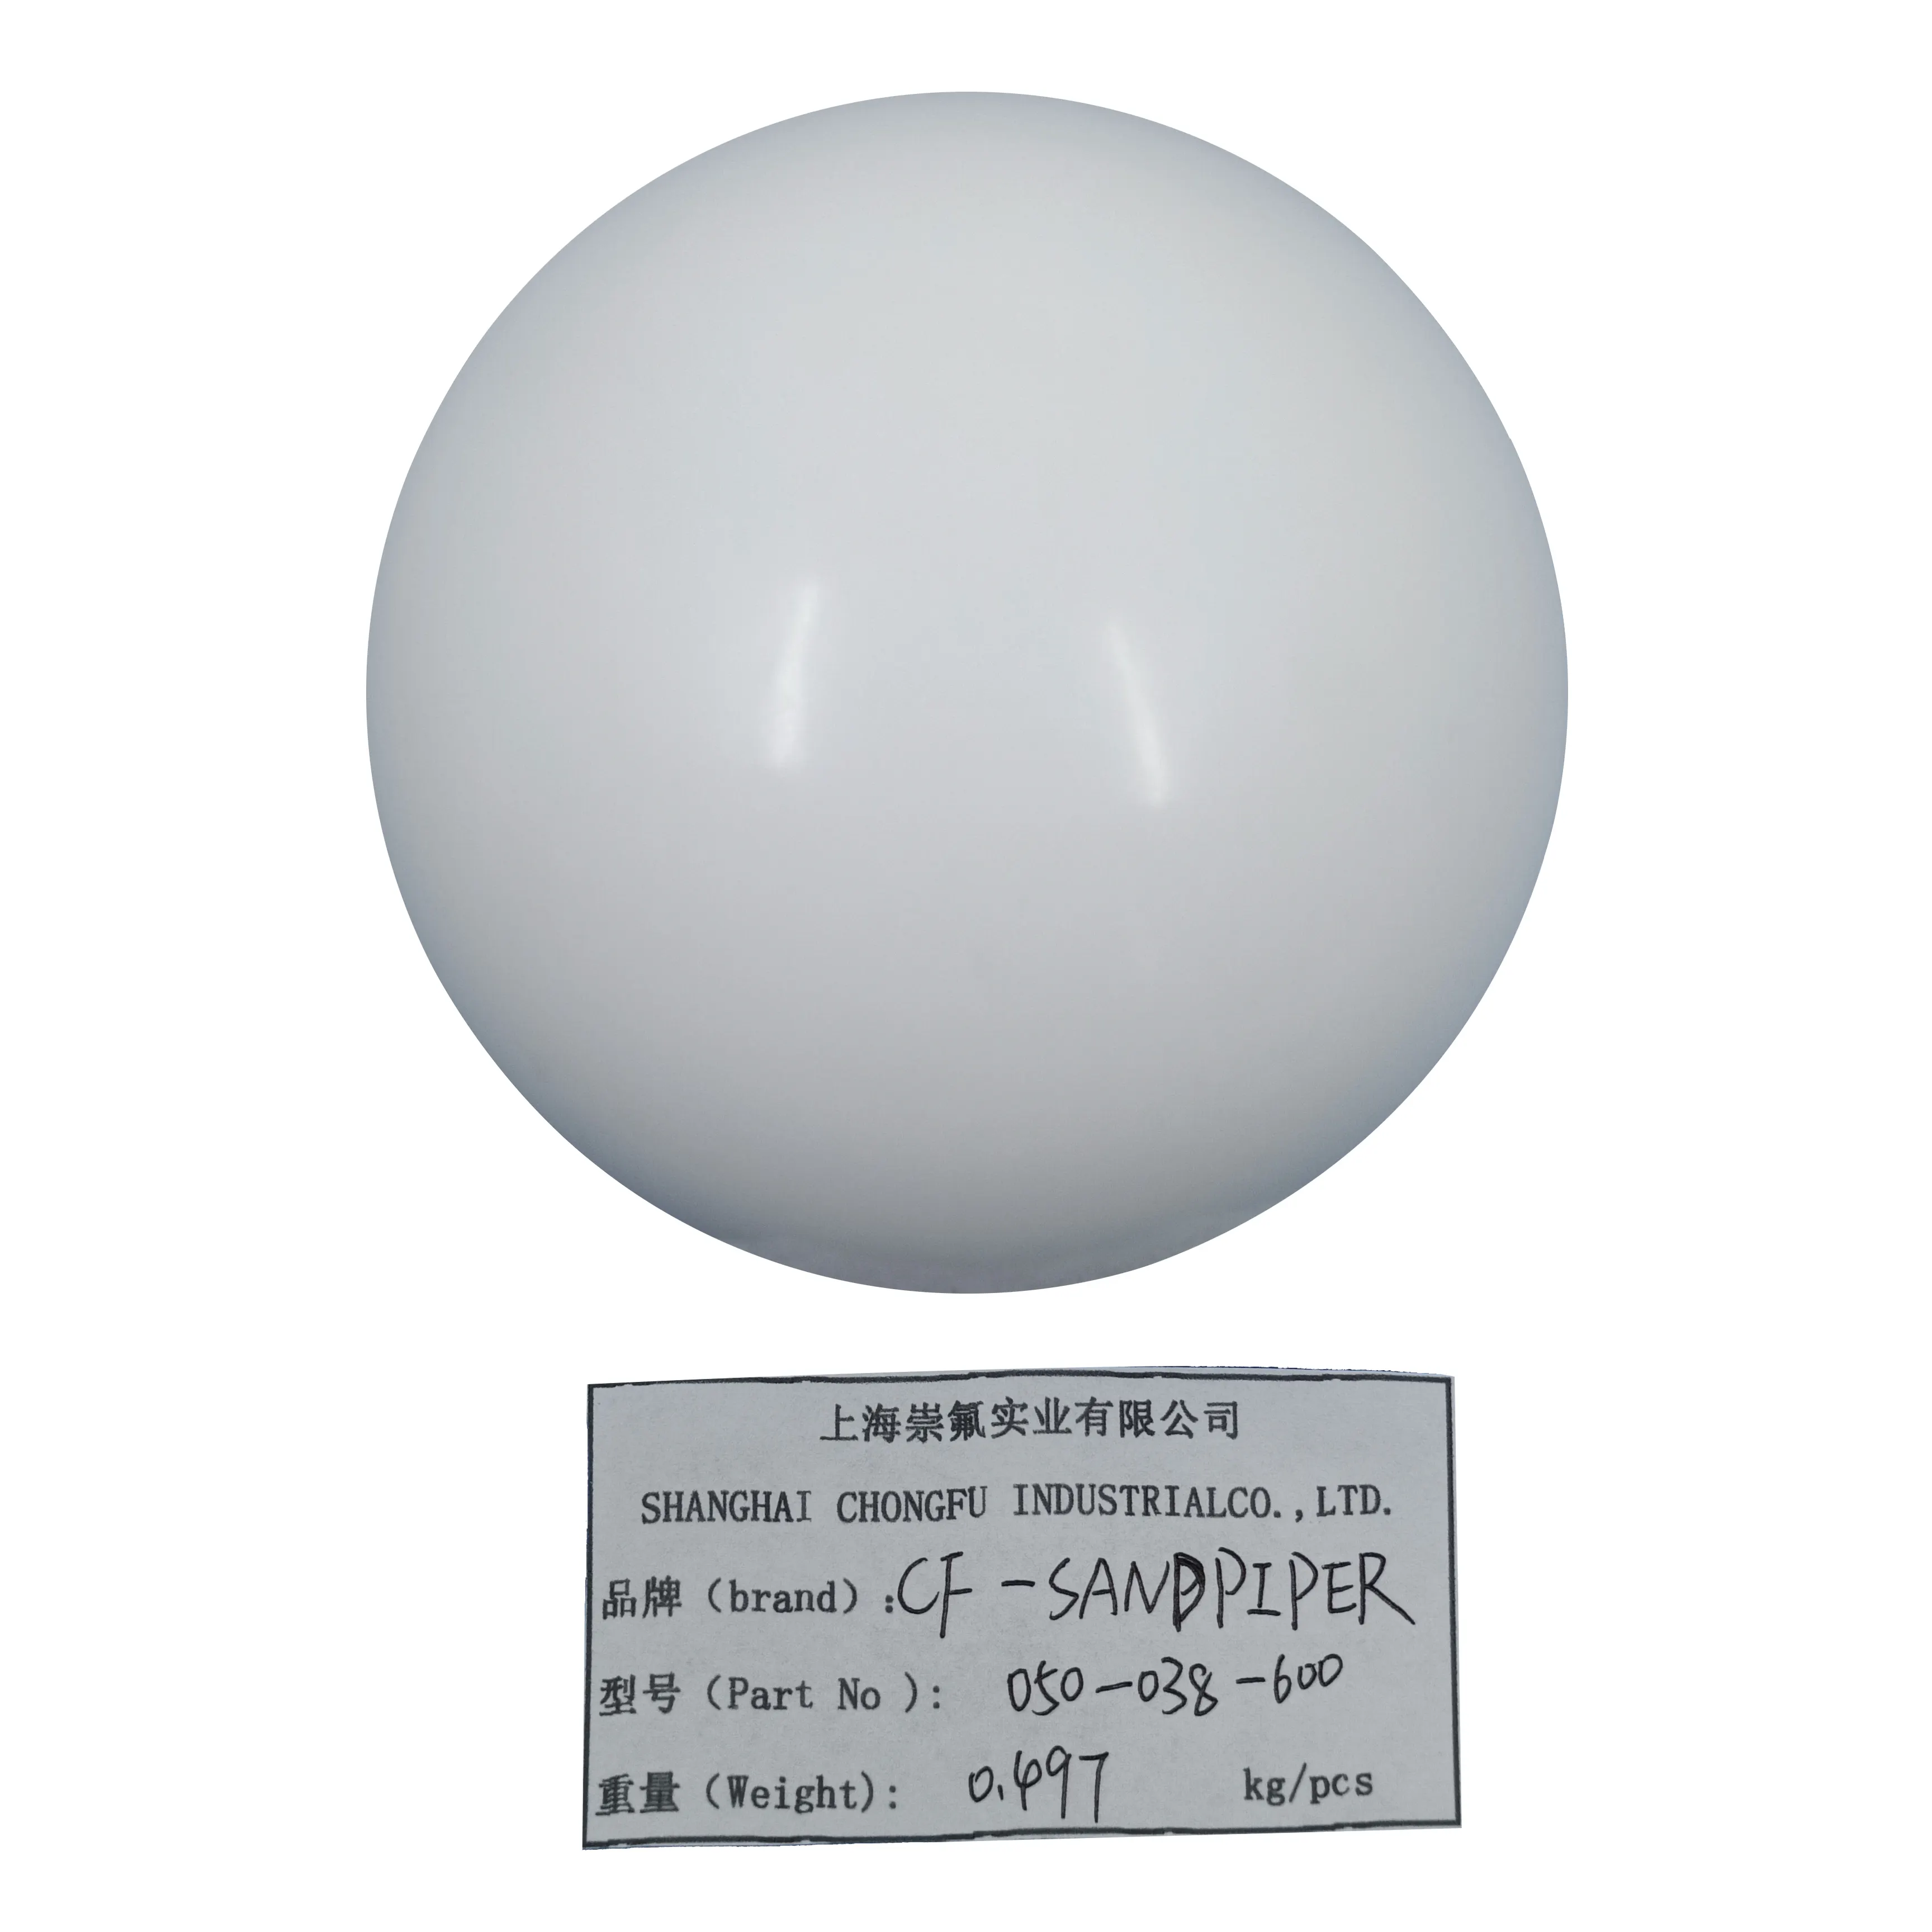 PTFE CF 050-038-600 Rubber Valve ball for Sandpiper Pneumatic diaphragm pump parts supply for various sizes and material